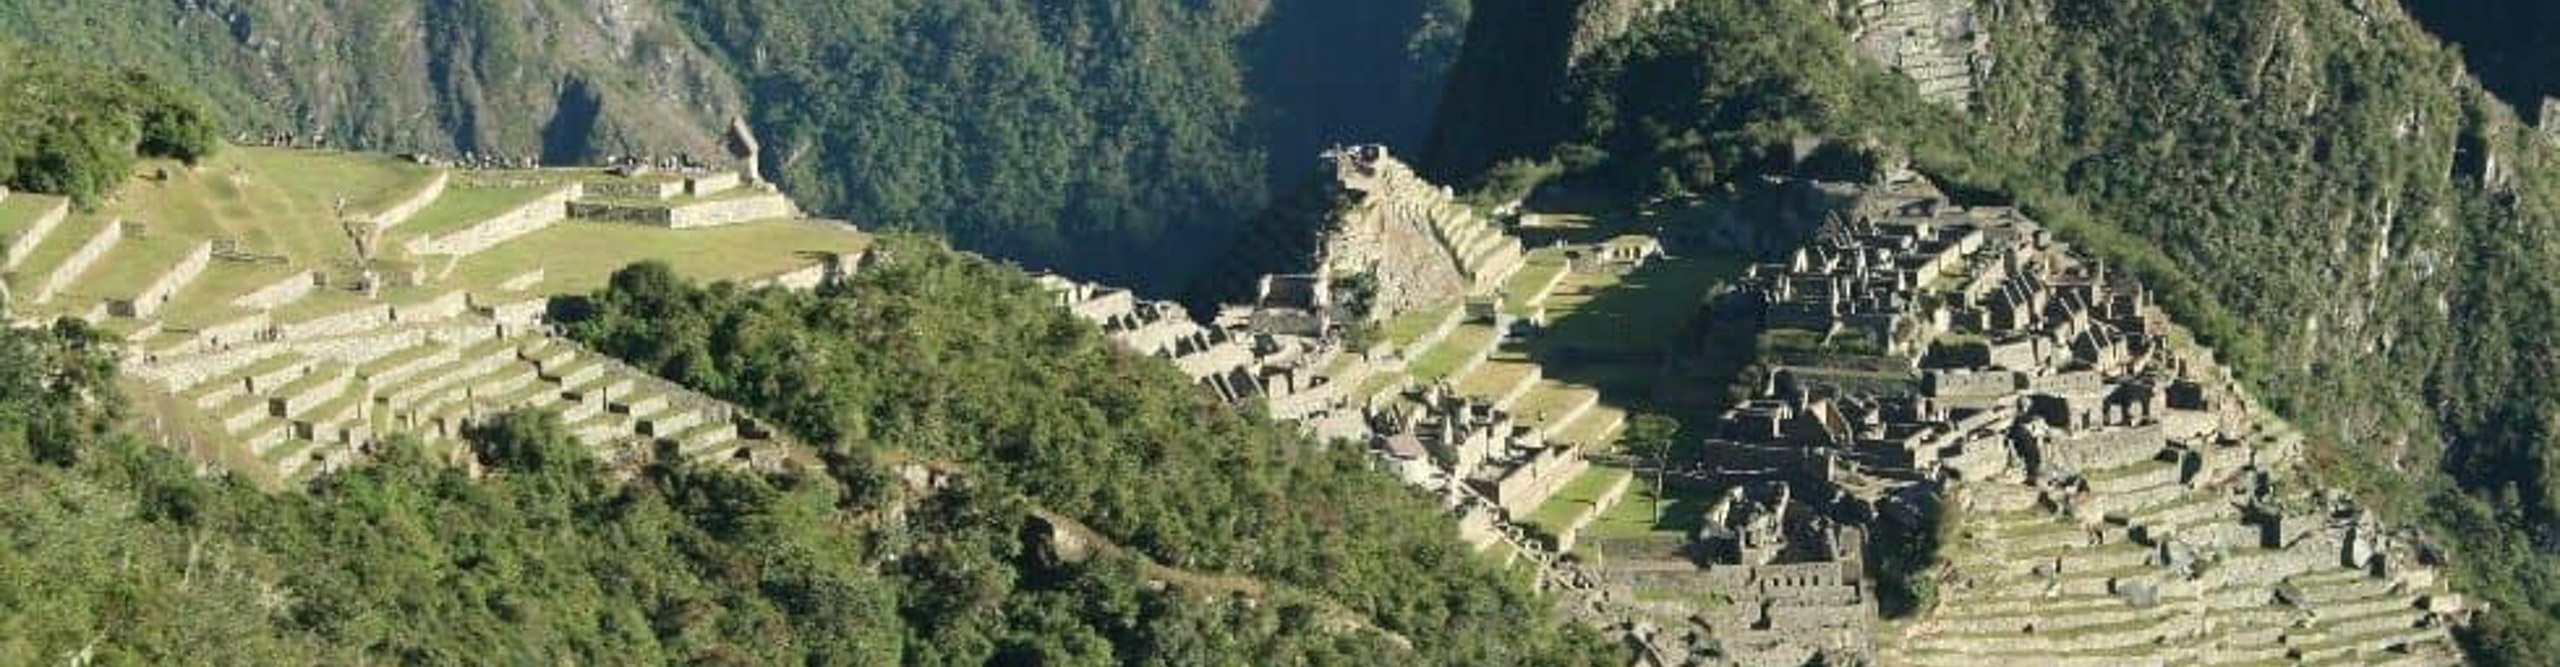 Aerial view of the Ica ruins at Machu Picchu on a clear sunny day, Peru